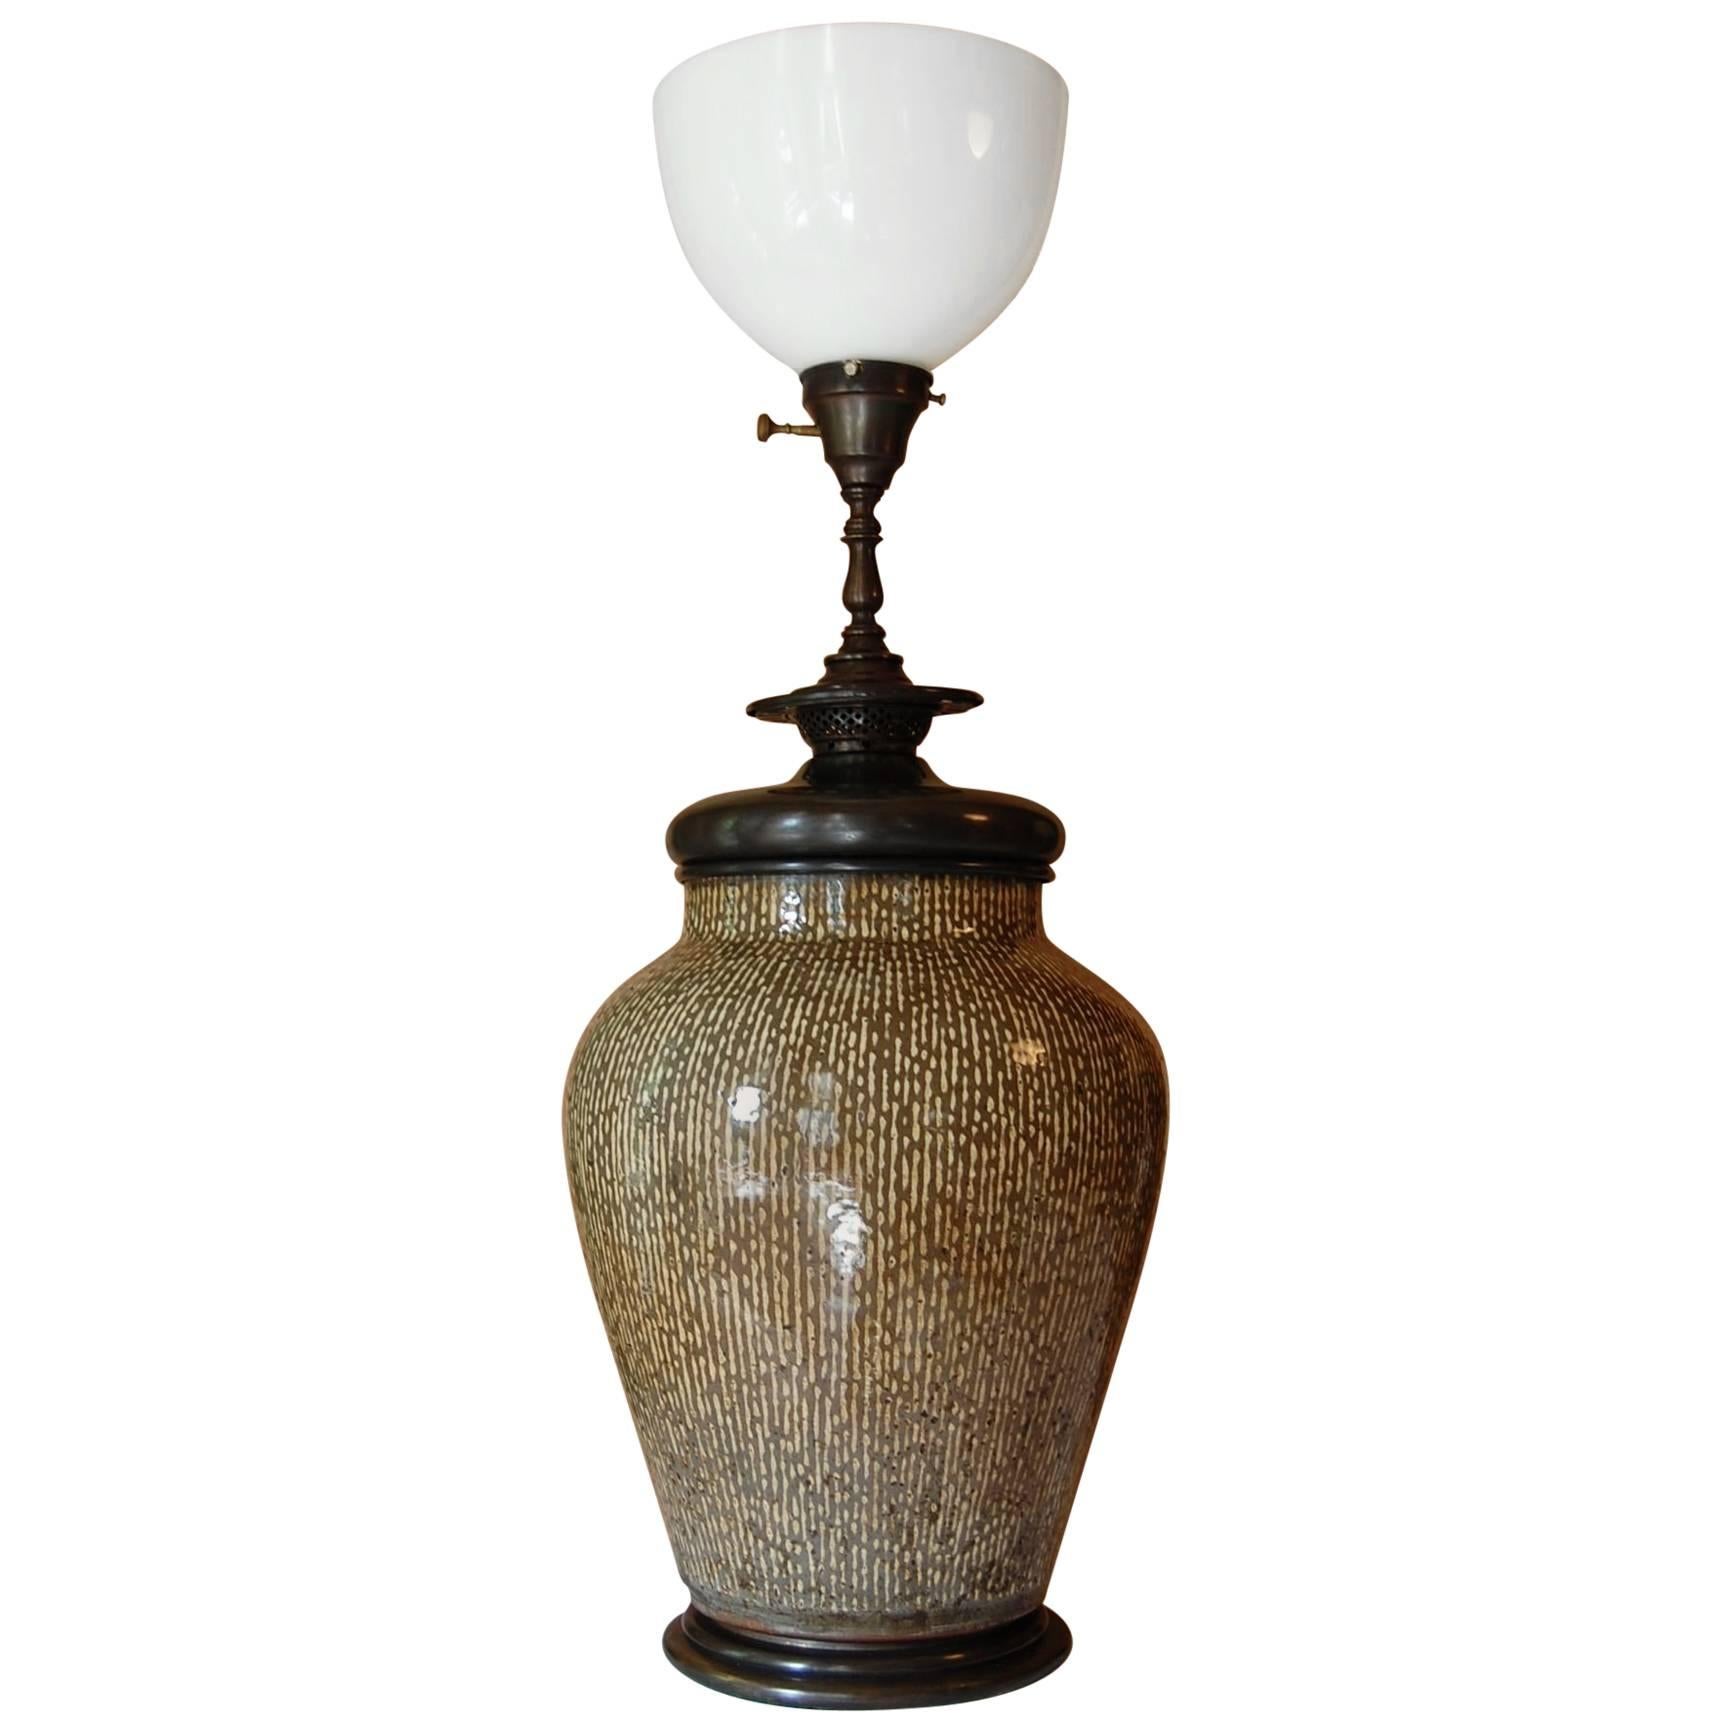 Asian Urn Wired as a Lamp with Bronze Base and Mounts, circa 1900